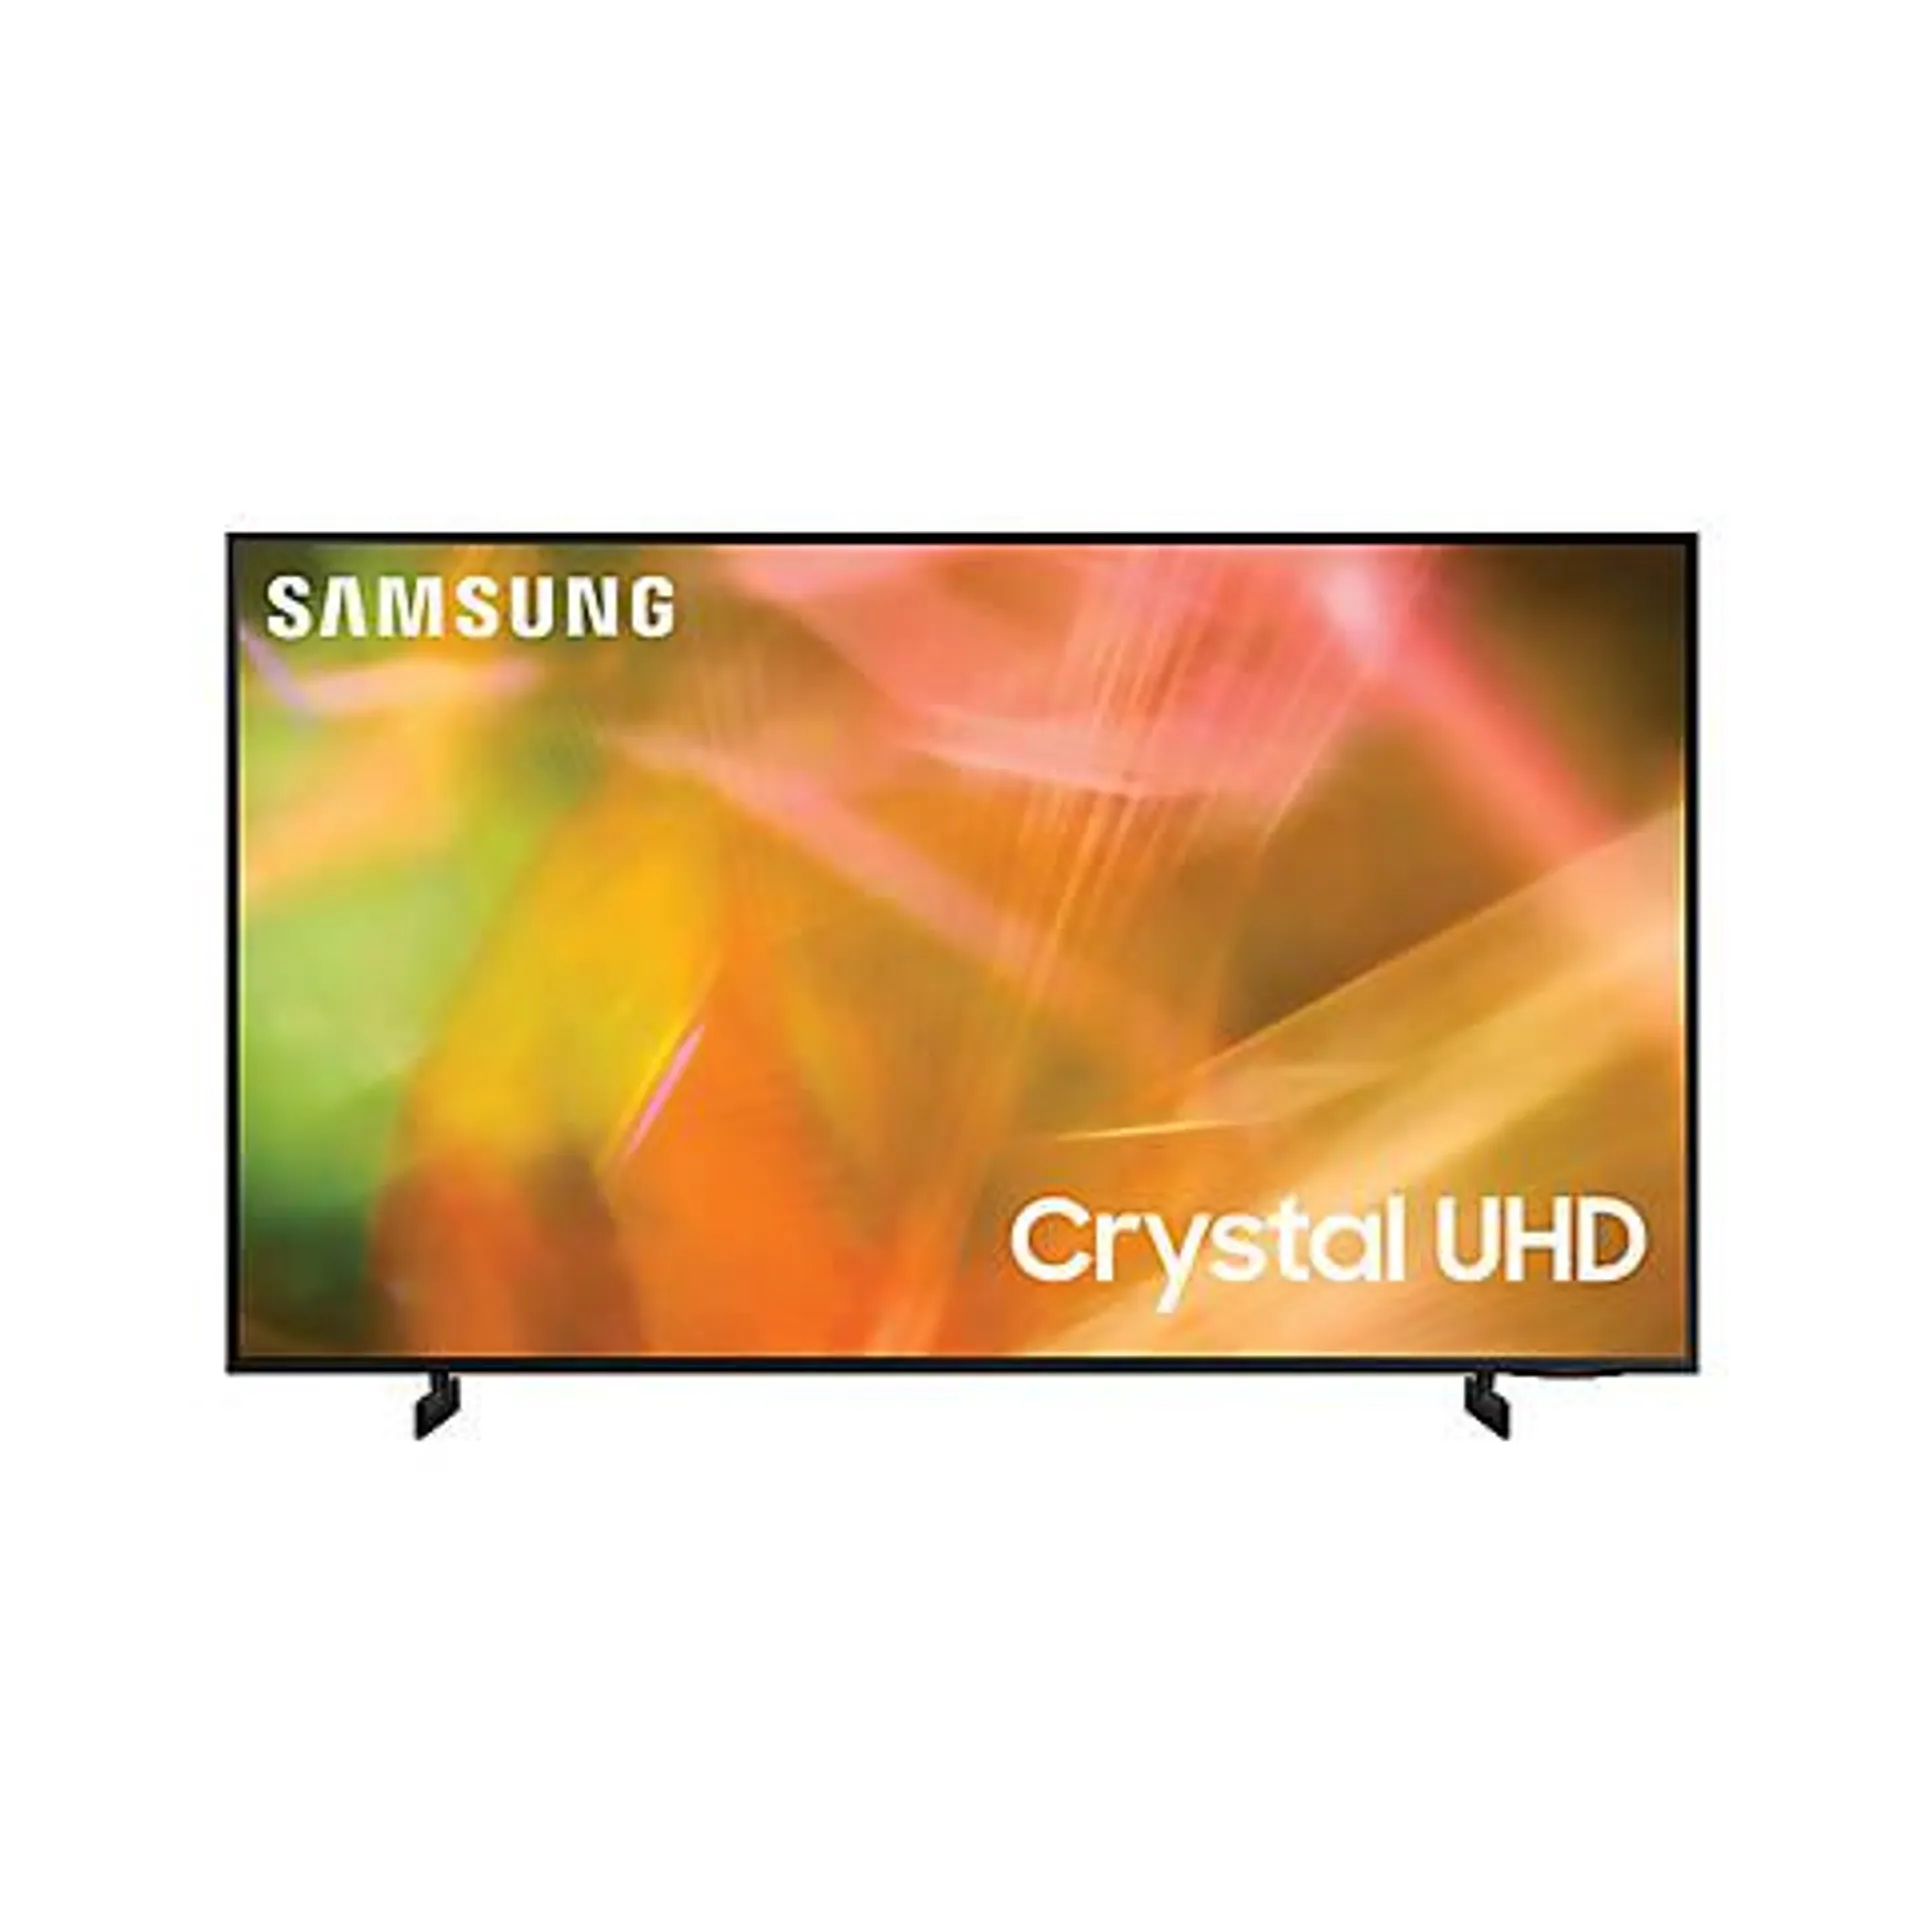 Samsung 55" AU800D Crystal UHD 4K Smart TV with 4-Year Coverage